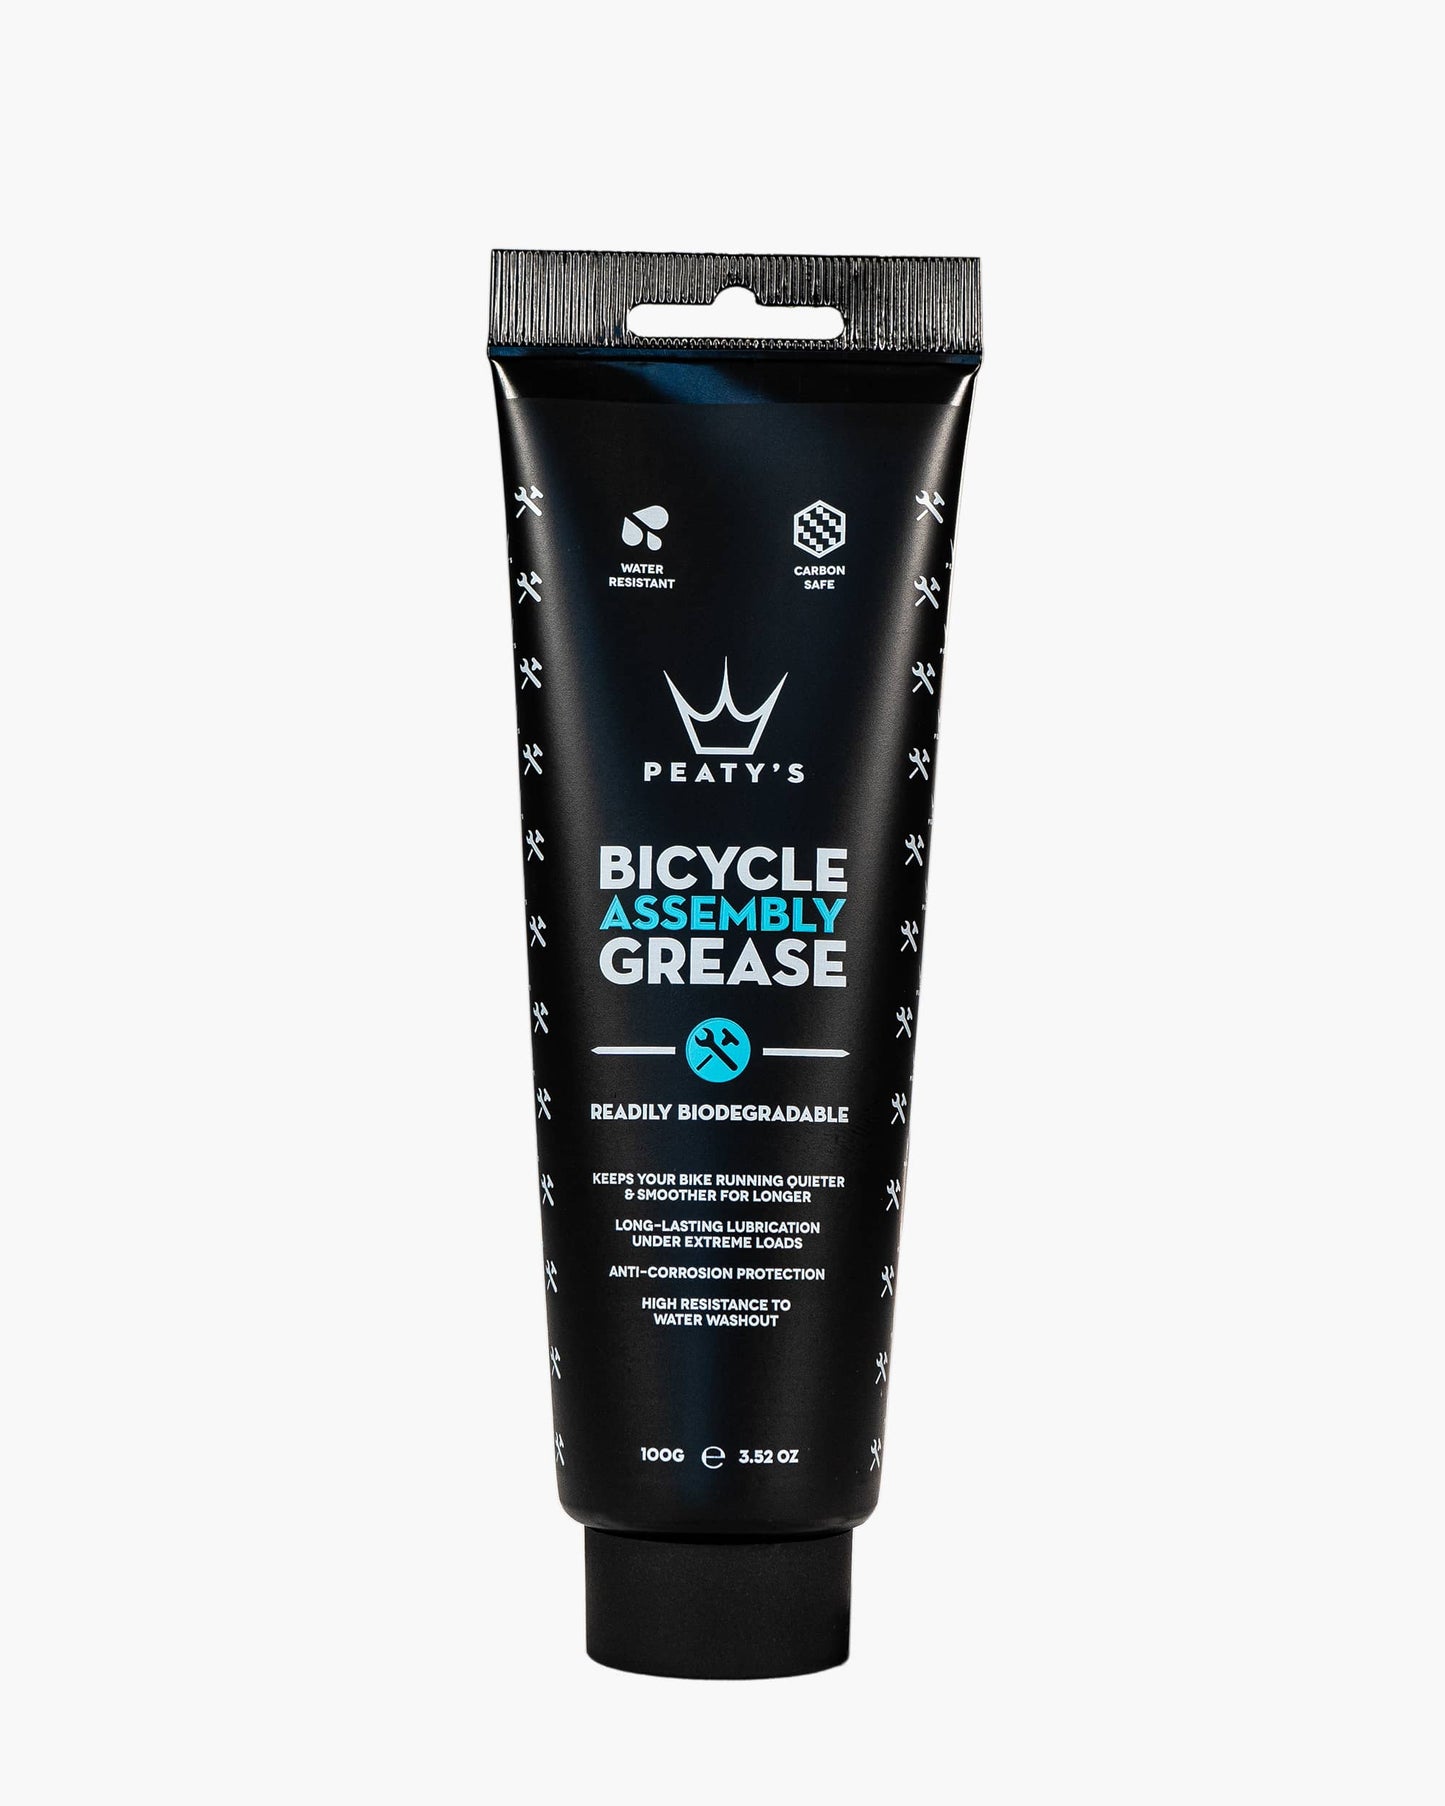 Peaty’s Bicycle Assembly Grease